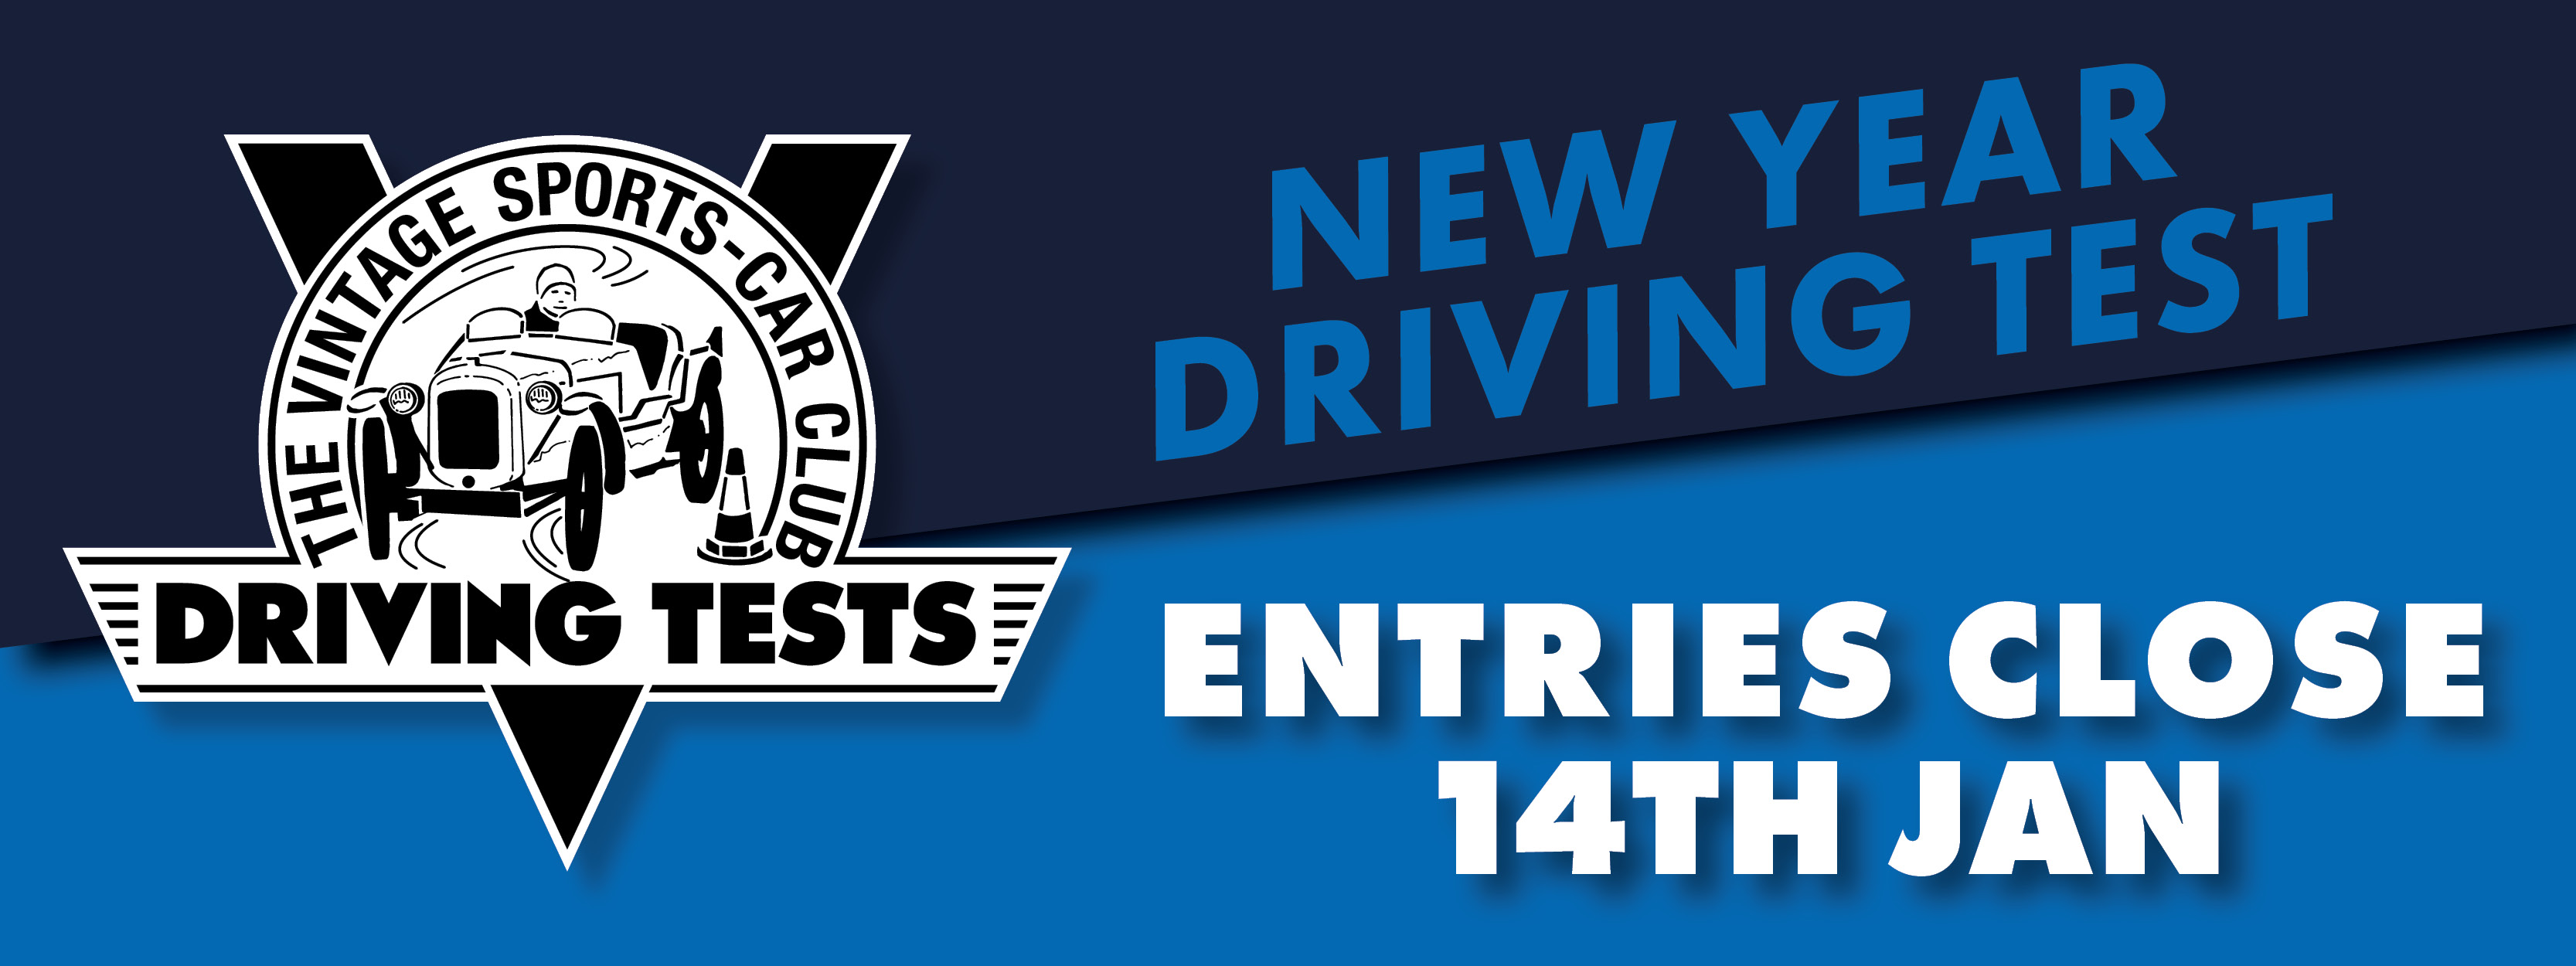 NEW YEAR DRIVING TESTS - ENTRIES CLOSING 14TH JANUARY cover